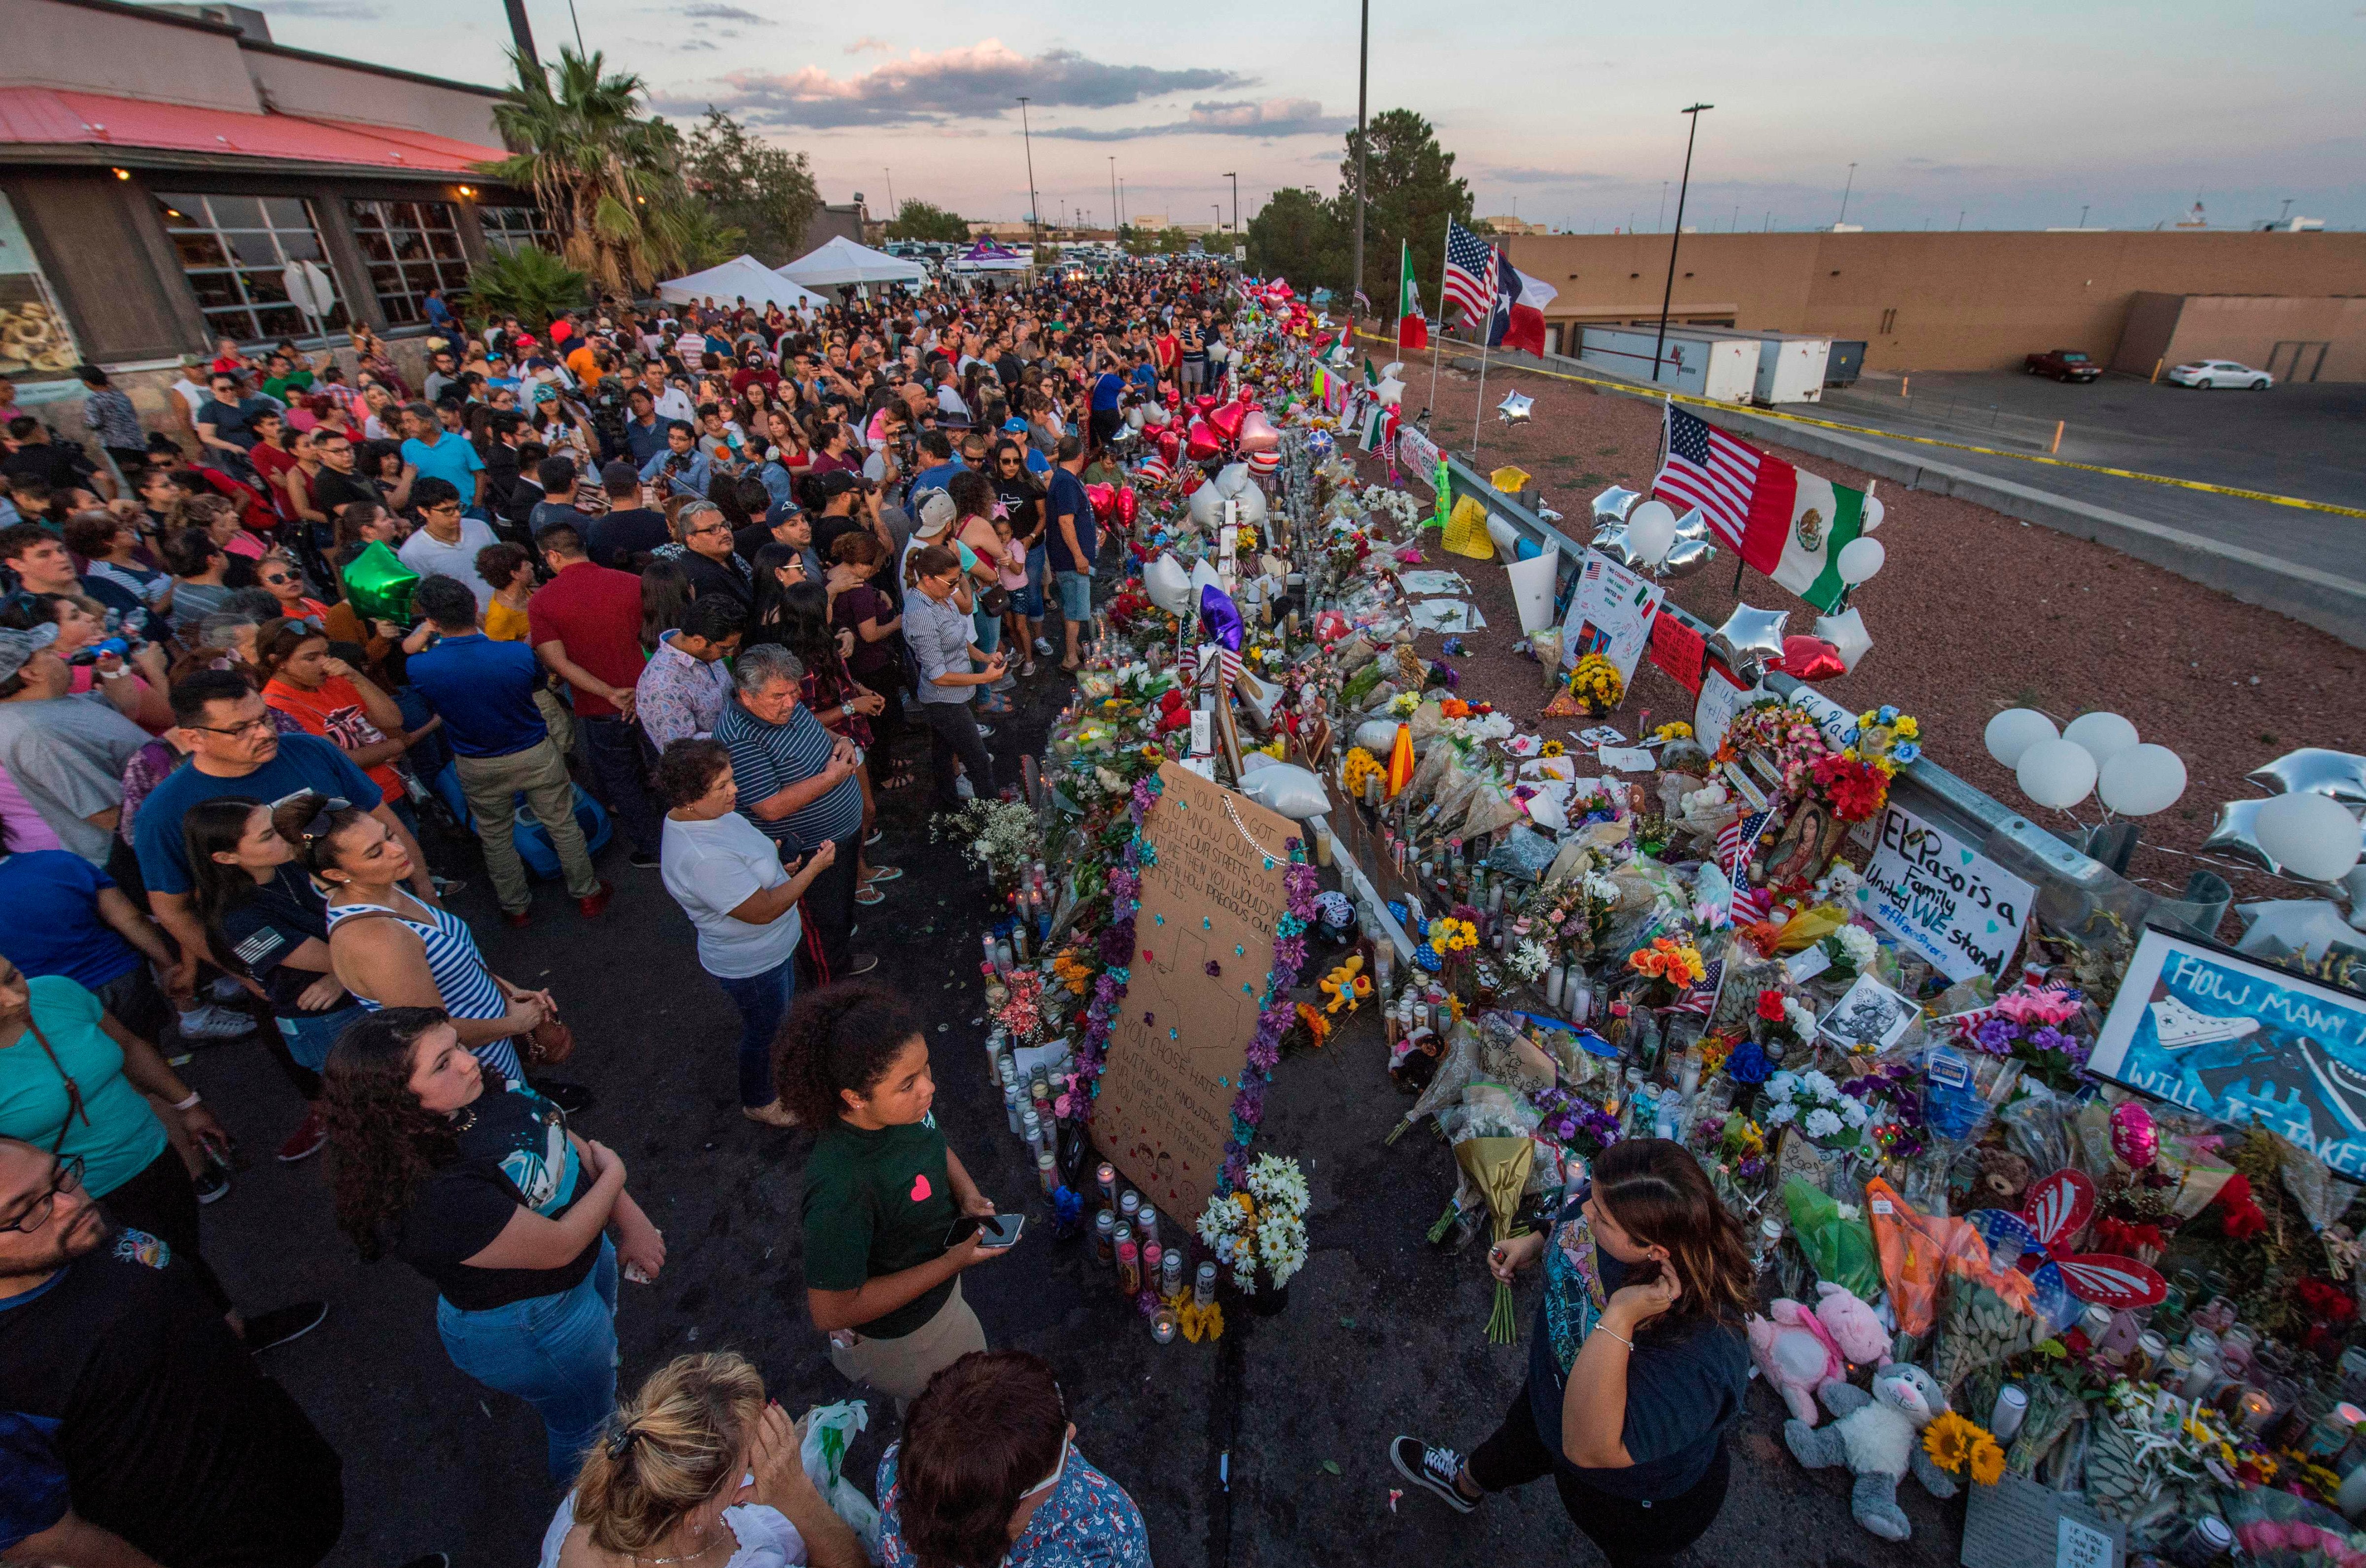 People pray and pay their respects at the makeshift memorial for victims of the shooting that left a total of 22 people dead at the Cielo Vista Mall WalMart (background) in El Paso, Texas, on August 6, 2019. - US President Donald Trump on Monday urged Republicans and Democrats to agree on tighter gun control and suggested legislation could be linked to immigration reform after two shootings left 30 people dead and sparked accusations that his rhetoric was part of the problem. (MARK RALSTON&mdash;AFP/Getty Images)